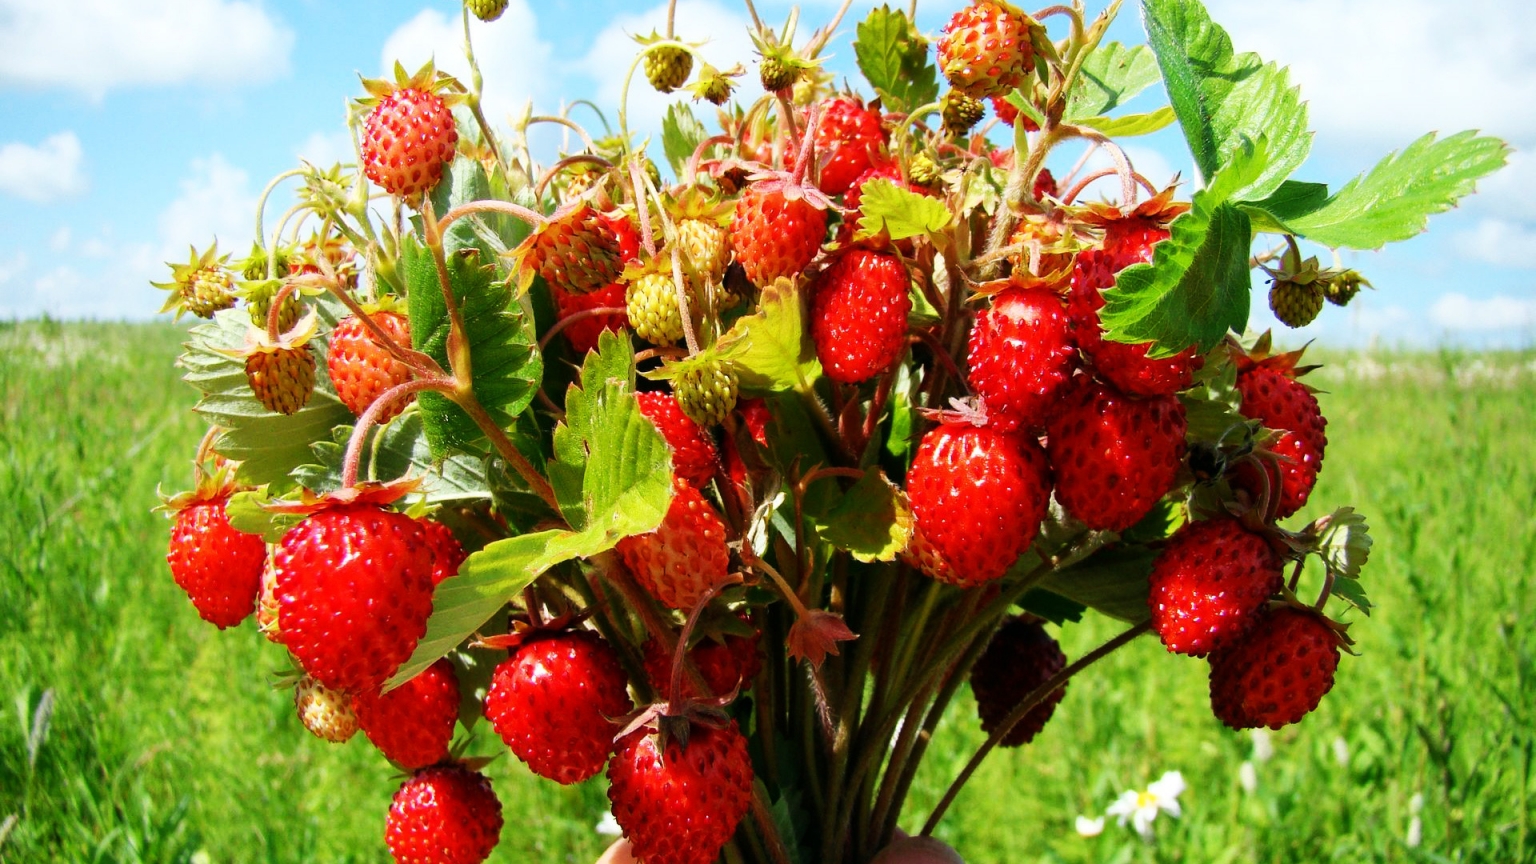 Bouquet of wild strawberries for 1536 x 864 HDTV resolution